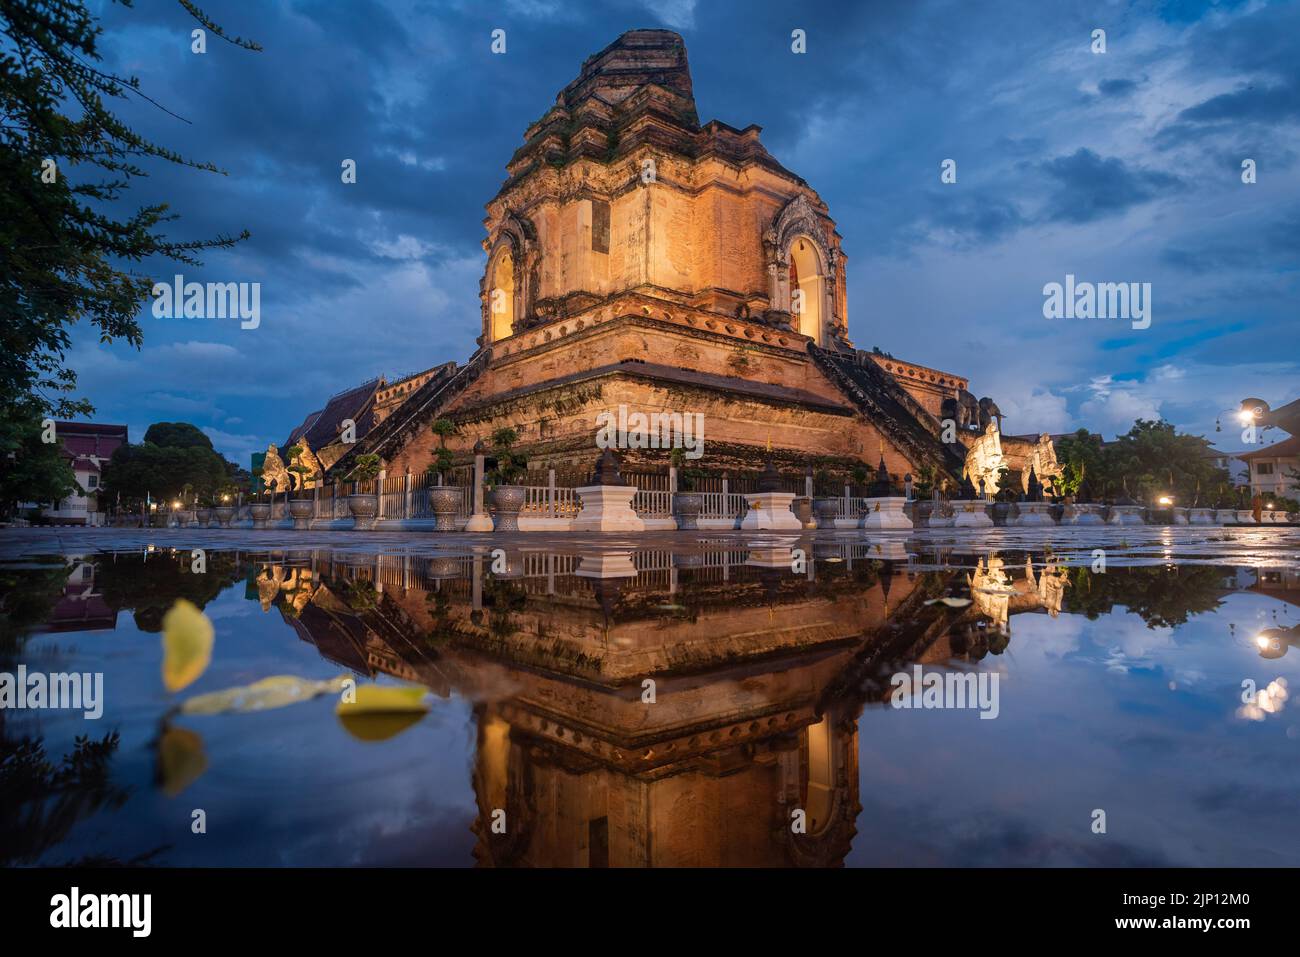 Ancient collapse pagoda reflection in rain water. Chedi Luang temple. Chiang Mai, Thailand. Stock Photo